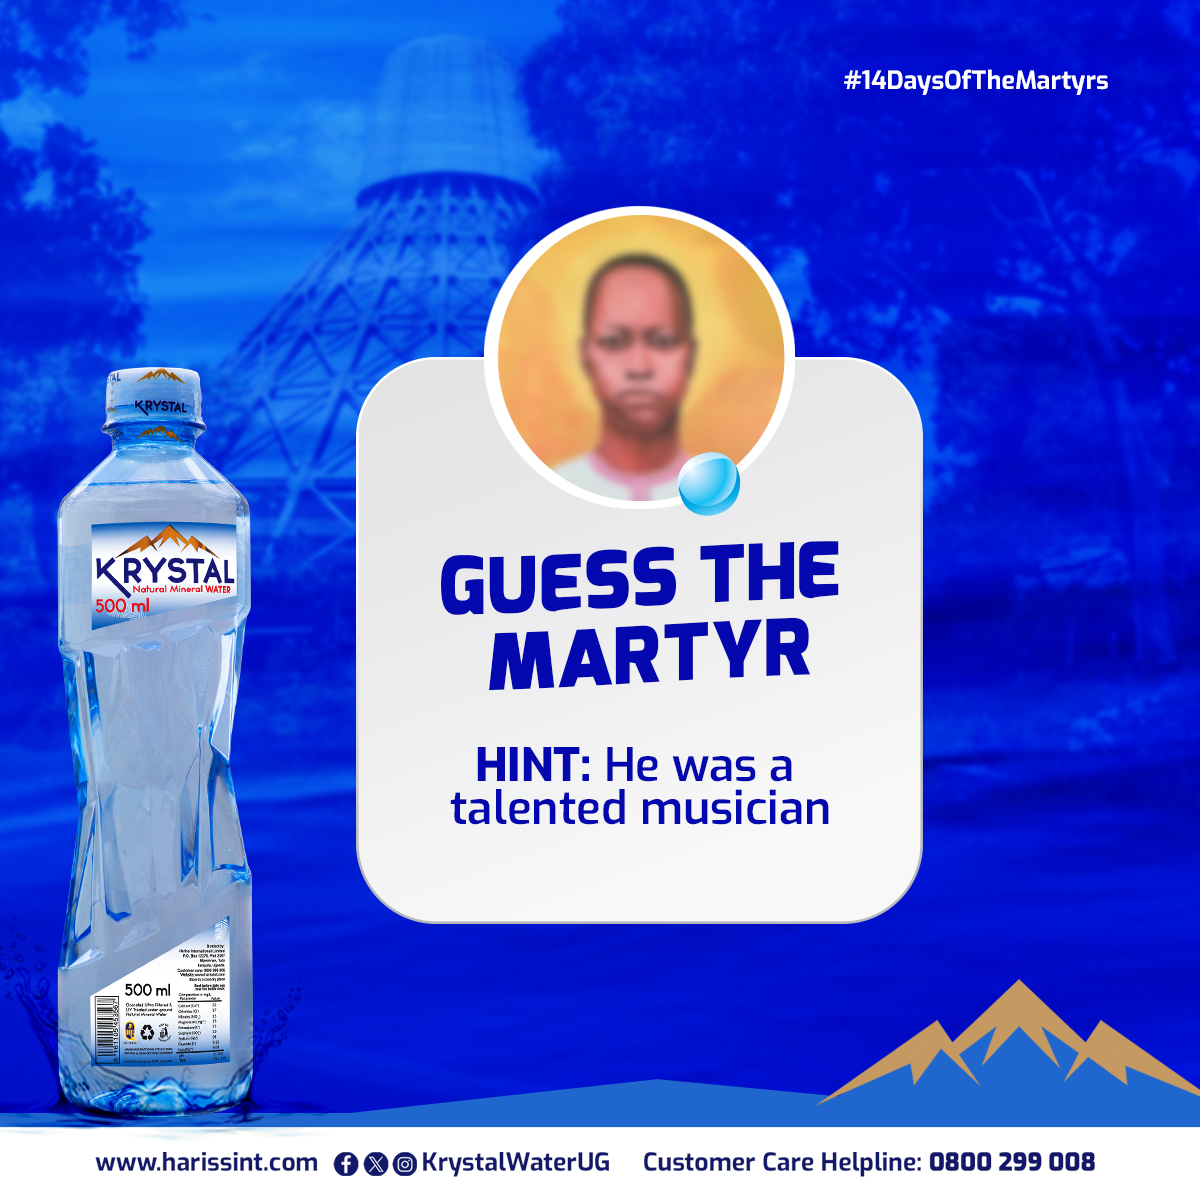 Martyrs Trivia: Can you guess the historical figure shown in the image? He was a talented musician. One person with the correct answer will be selected randomly at 5 PM and rewarded with UGX 50,000. #14DaysOfTheMartyrs #UgandaMartyrs